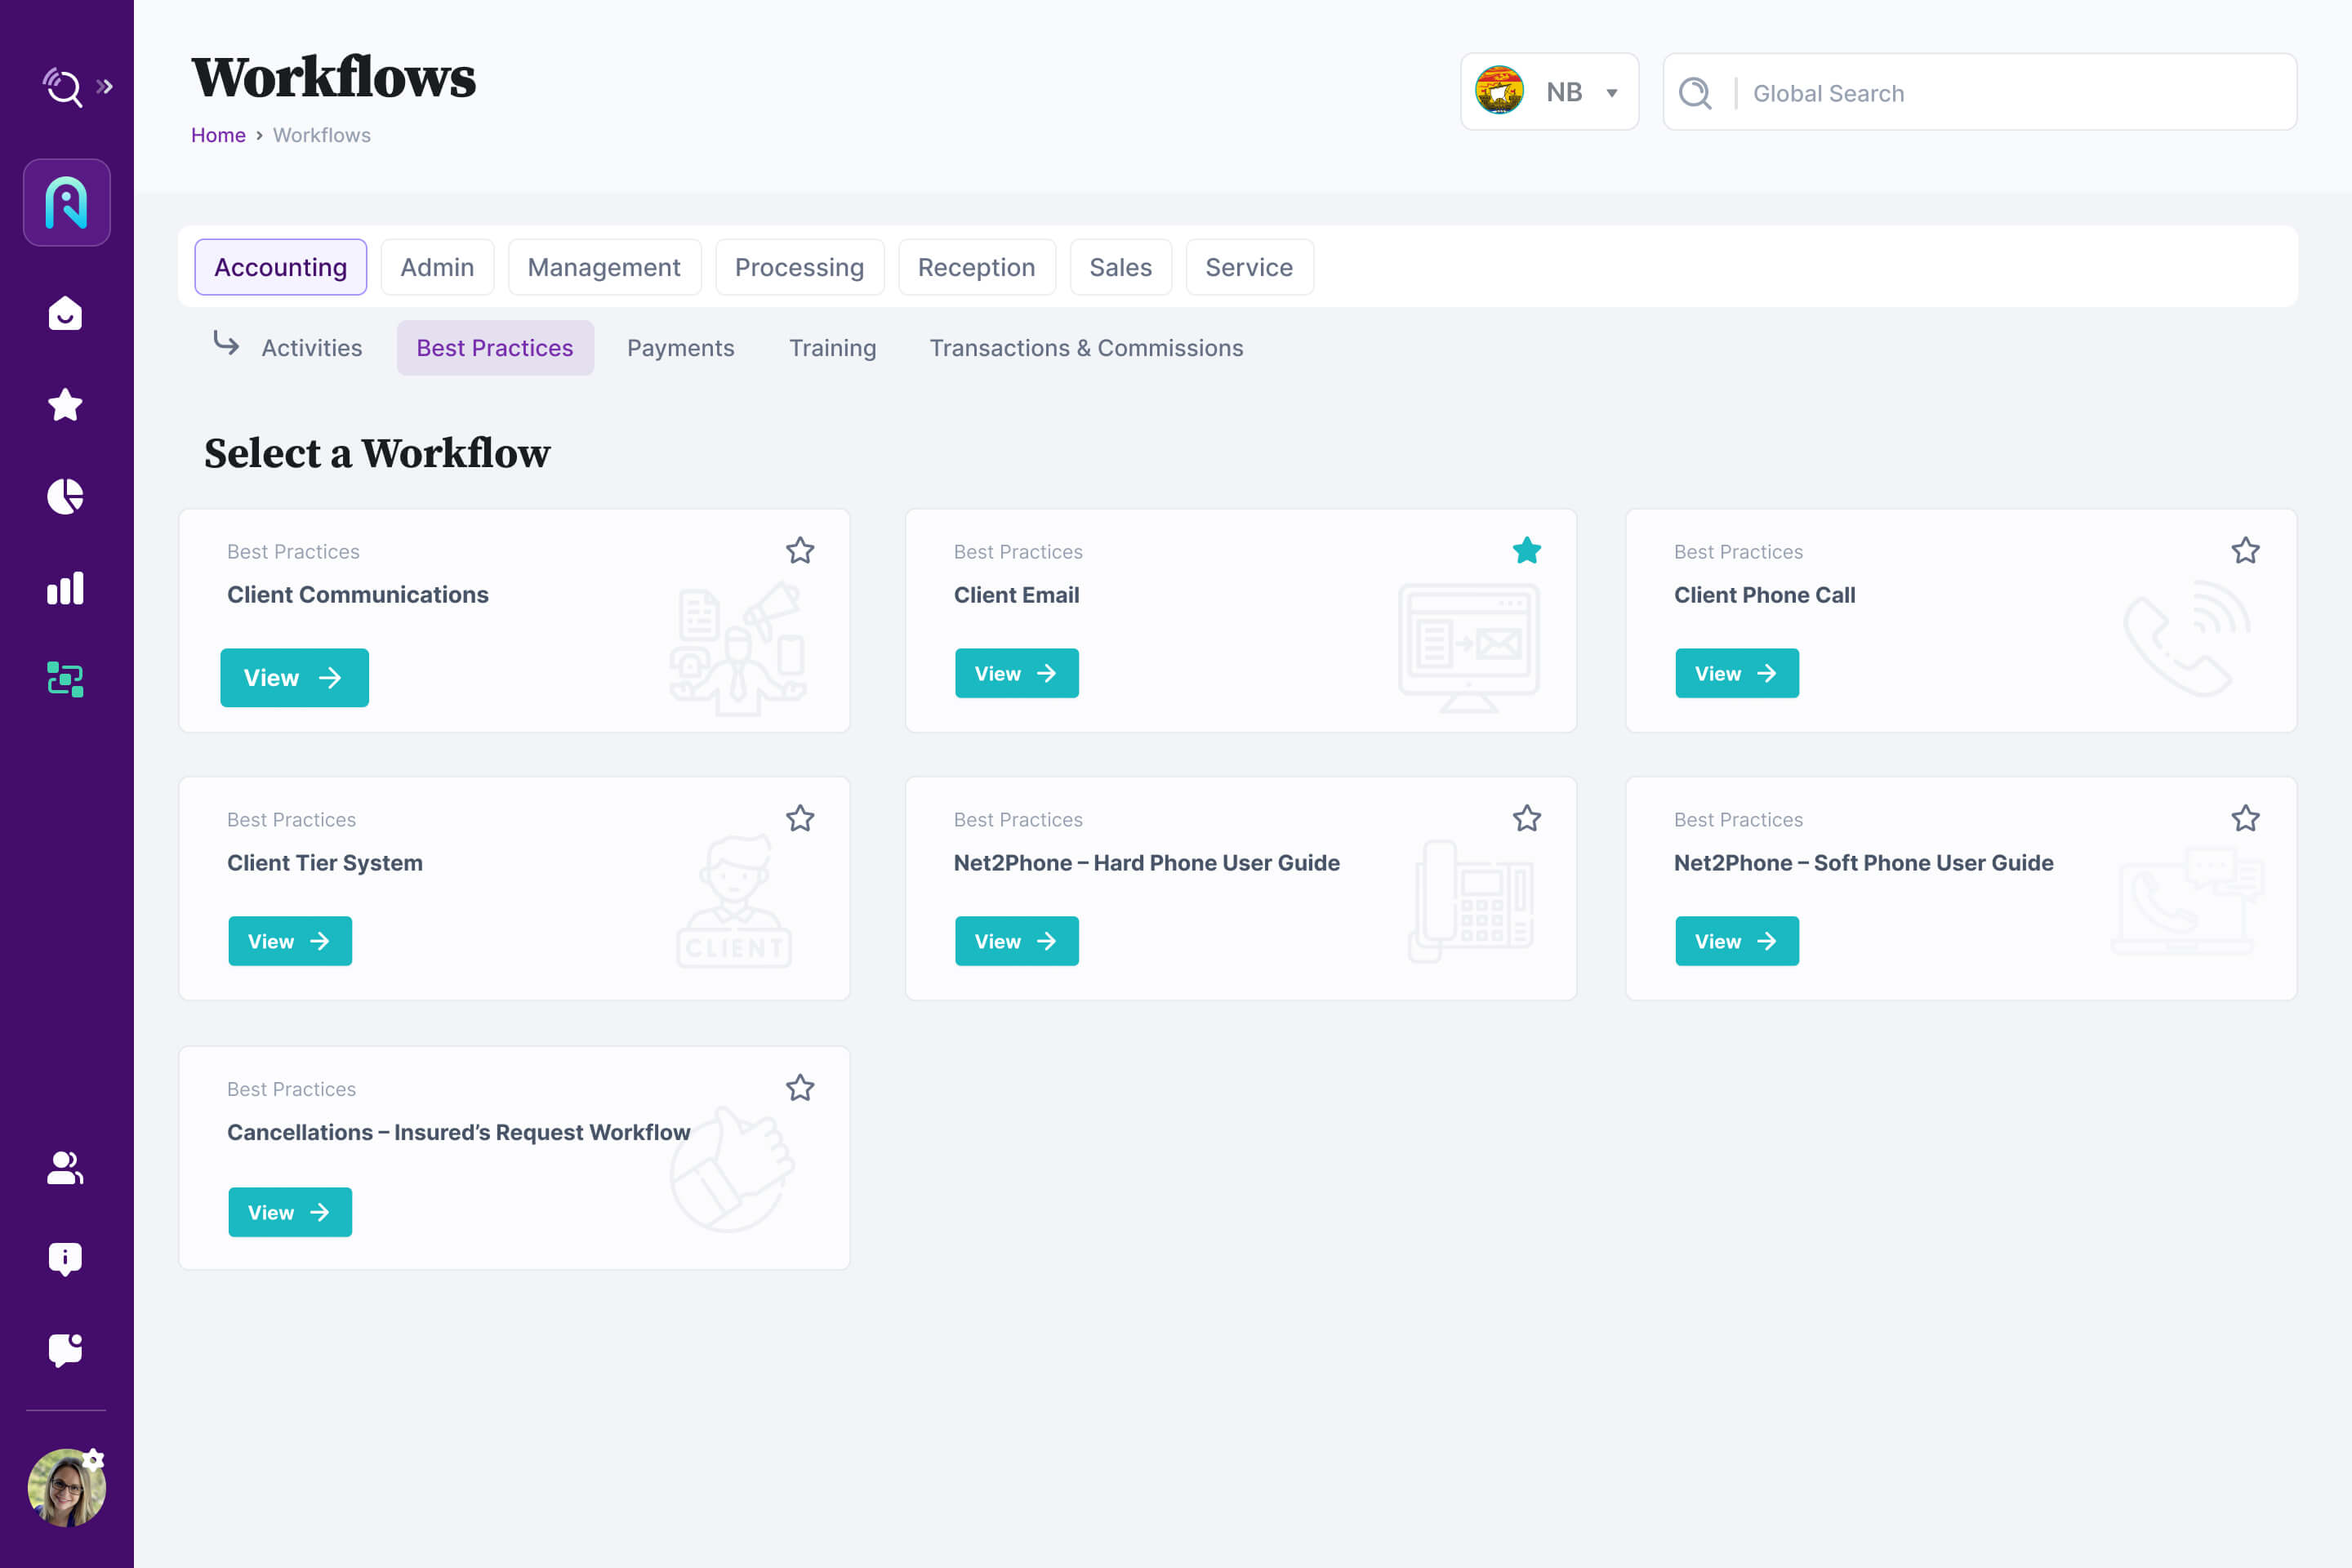 Workflow Pages